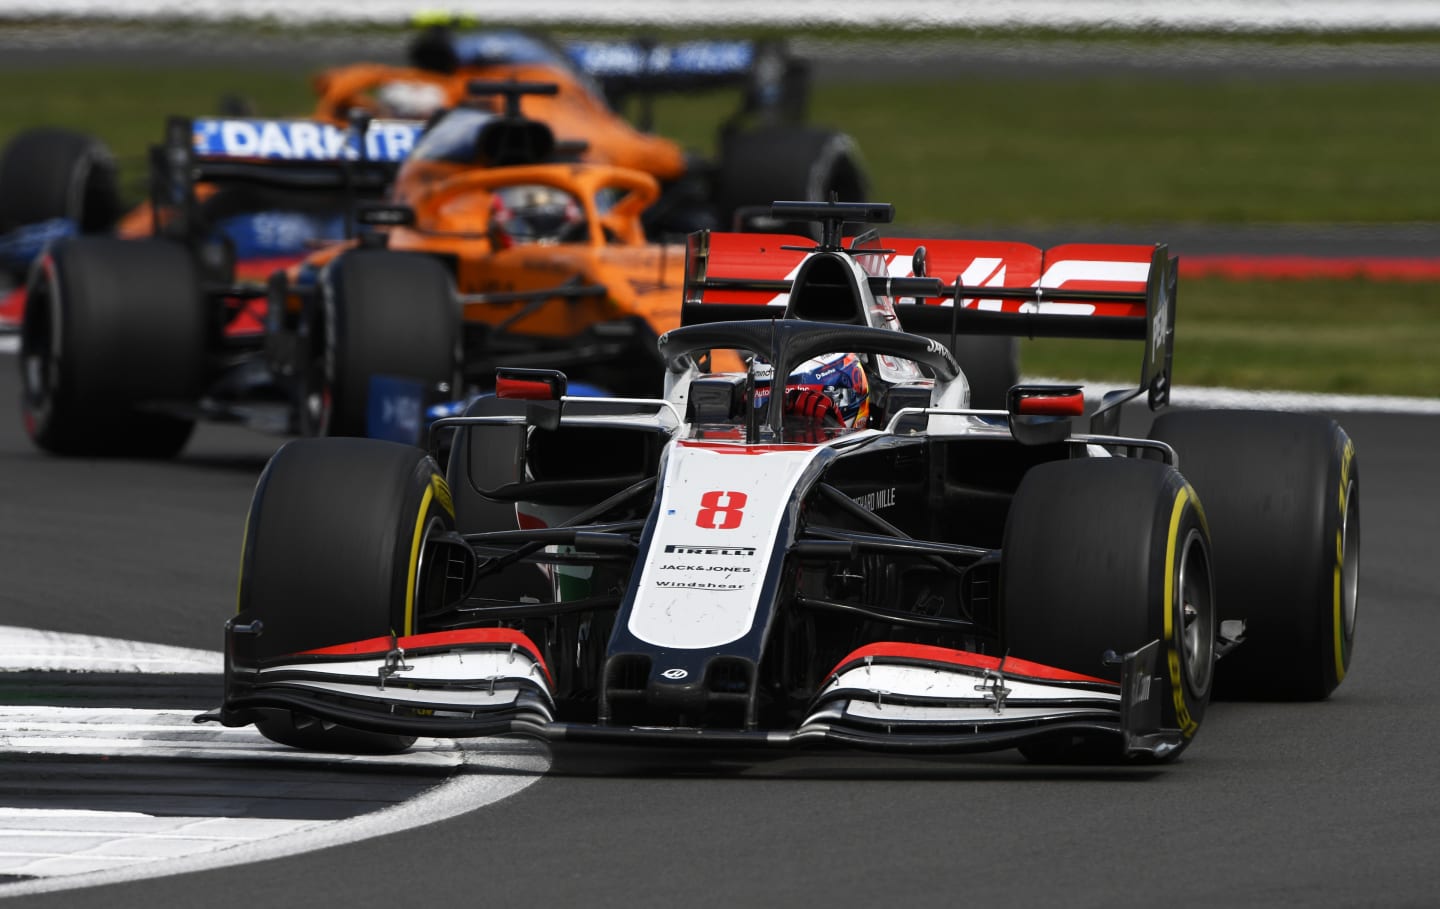 NORTHAMPTON, ENGLAND - AUGUST 02: Romain Grosjean of France driving the (8) Haas F1 Team VF-20 Ferrari on track during the F1 Grand Prix of Great Britain at Silverstone on August 02, 2020 in Northampton, England. (Photo by Rudy Carezzevoli/Getty Images)